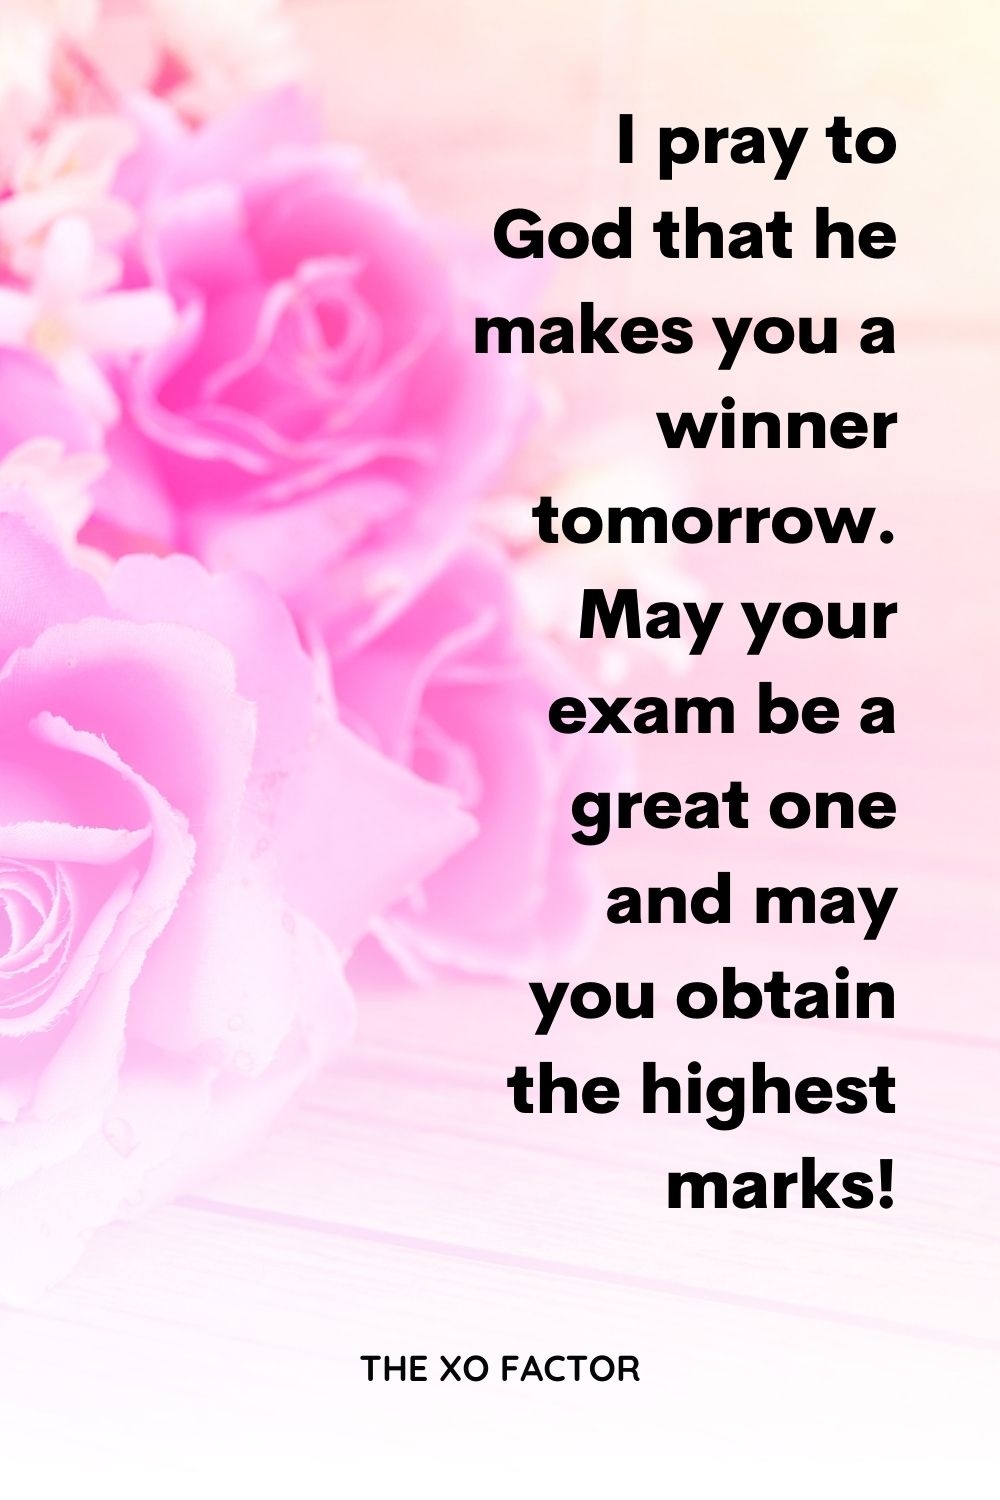 I pray to god that he makes you a winner tomorrow. May your exam be a great one and may you obtain the highest marks!